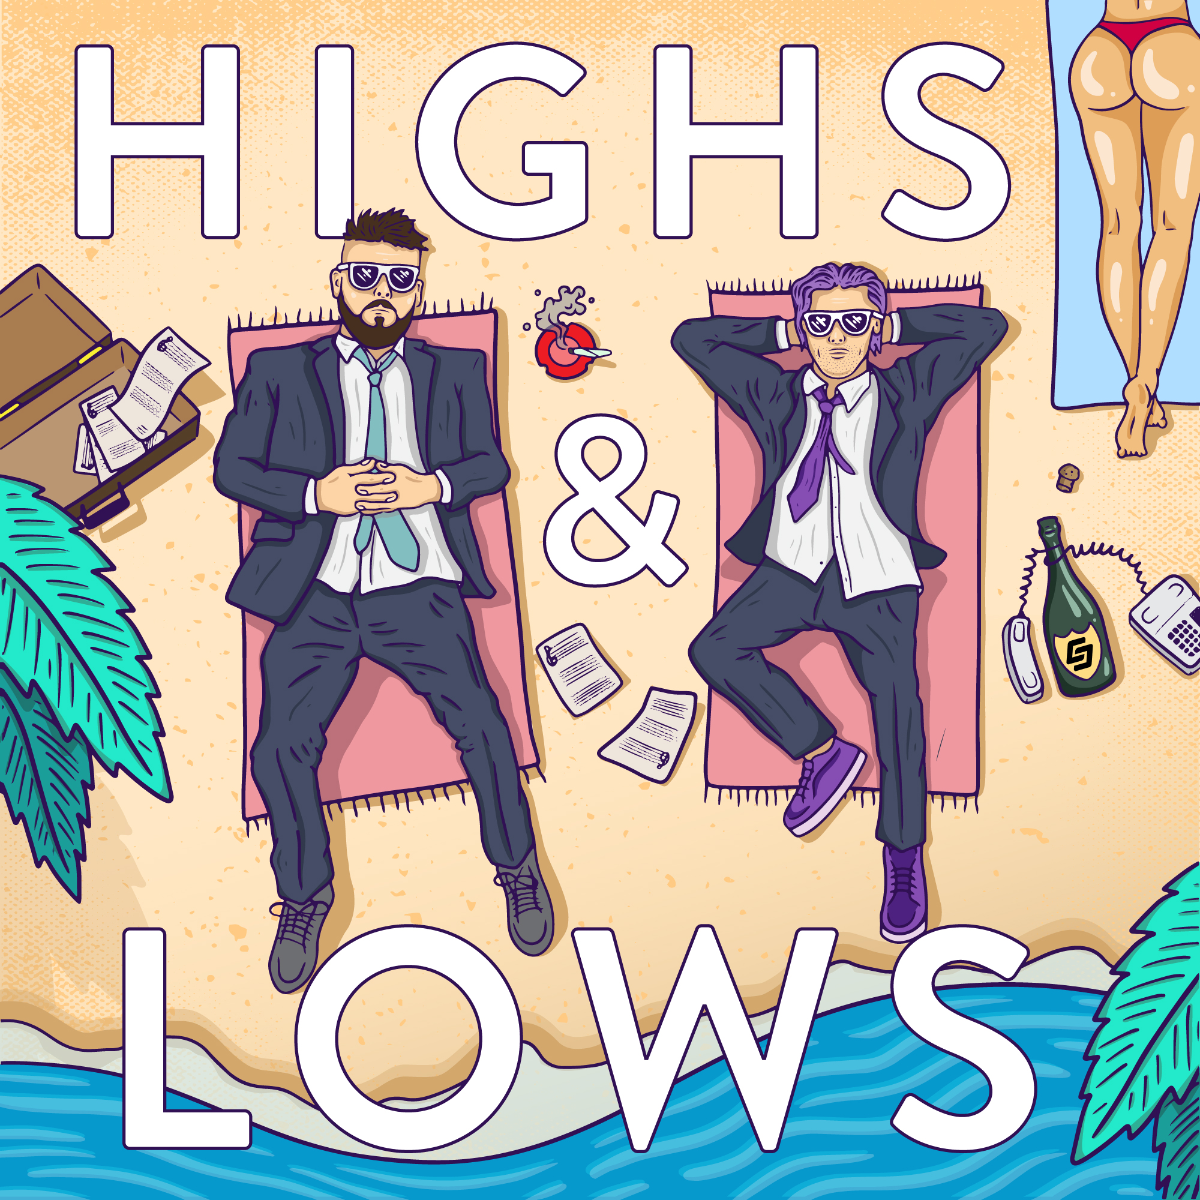 Corporate Slackrs Tells Us The ‘Highs and Lows’ In Buzzing EP